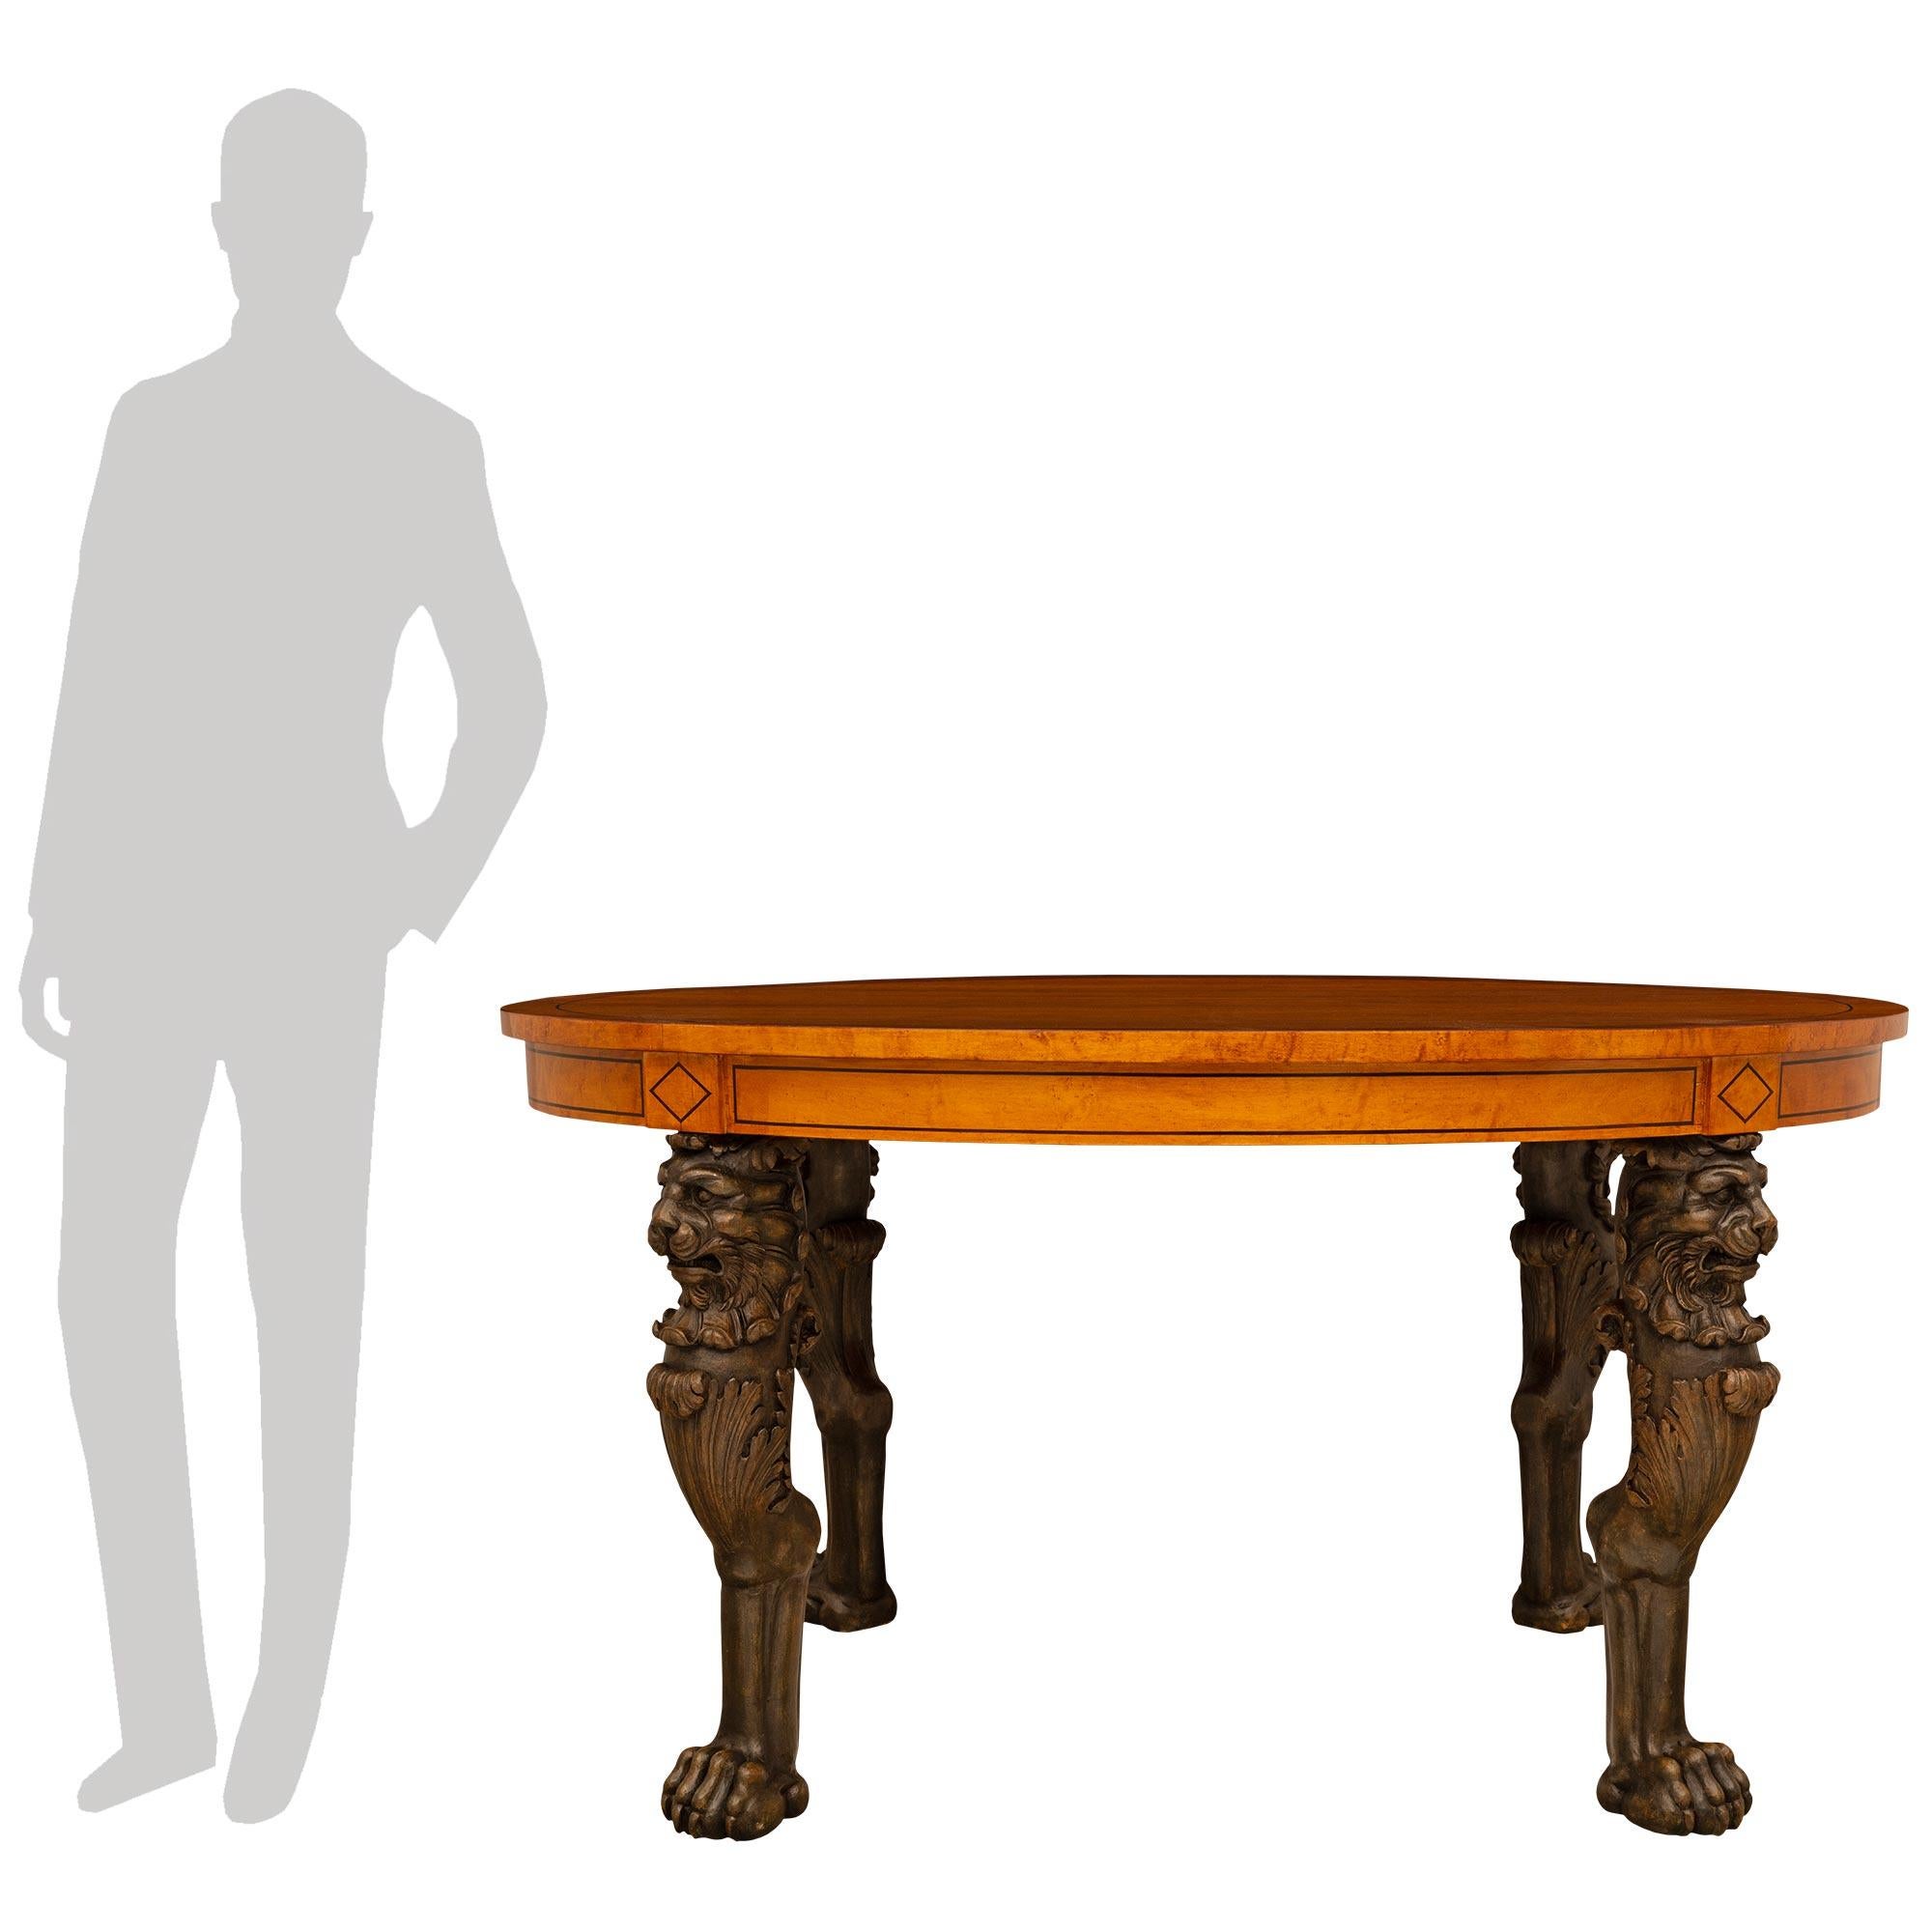 A finely detailed French 19th century Empire st. Lemon and patinated wood center table. This very unique oval table is raised by four statement making legs displaying large scale paw feet leading to a scrolled acanthus leaf below a handsome lion's